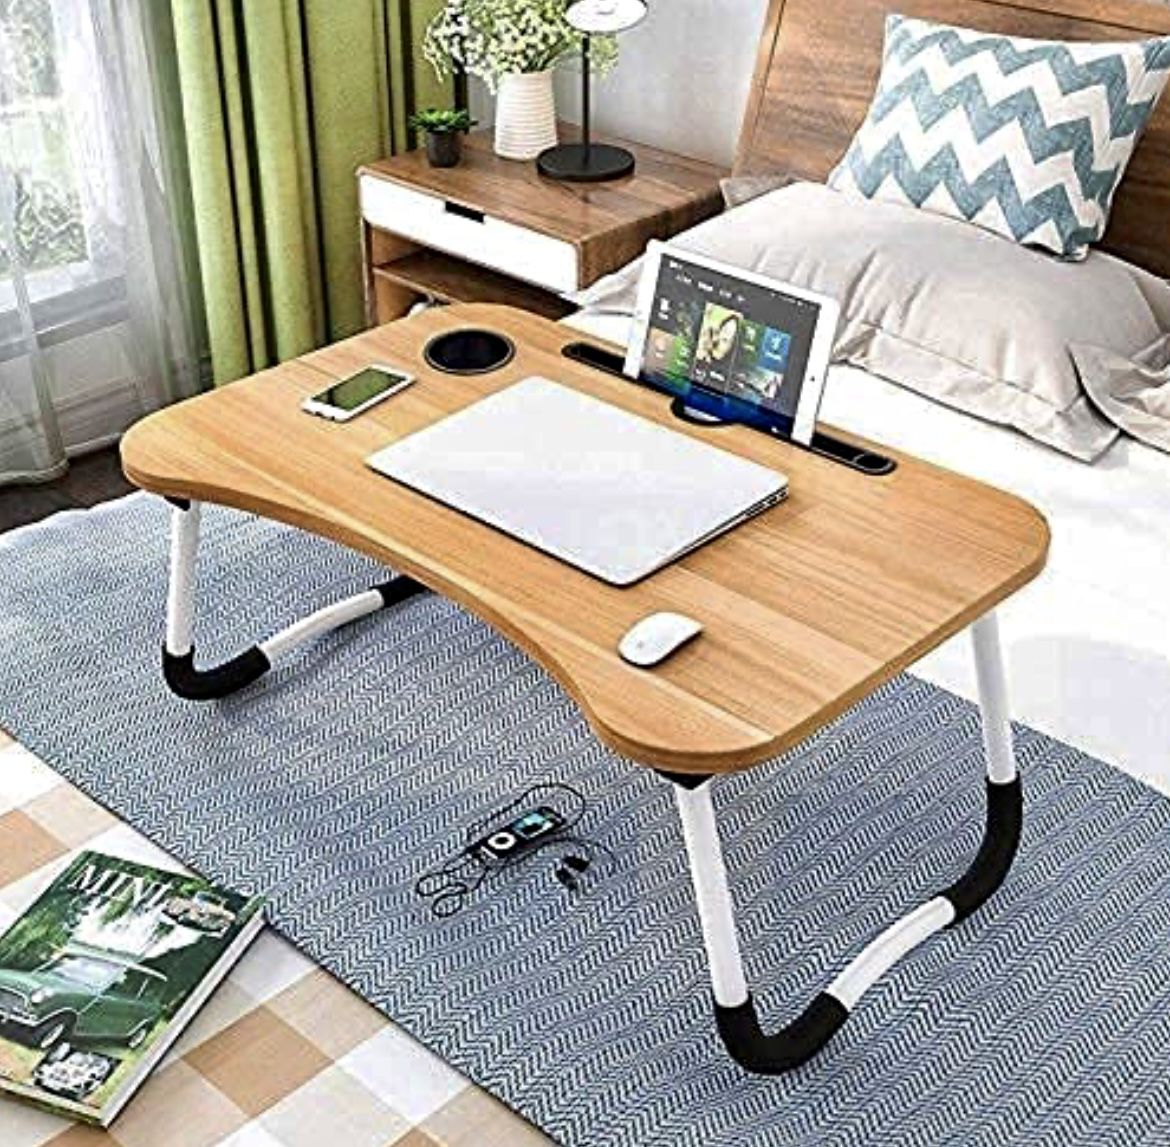 *NEW* Oak Laptop Desk, Wheanen Portable Laptop Bed Tray Table Notebook Stand Reading Holder with Foldable Legs & Cup Slot for Eating Breakfast, Readin